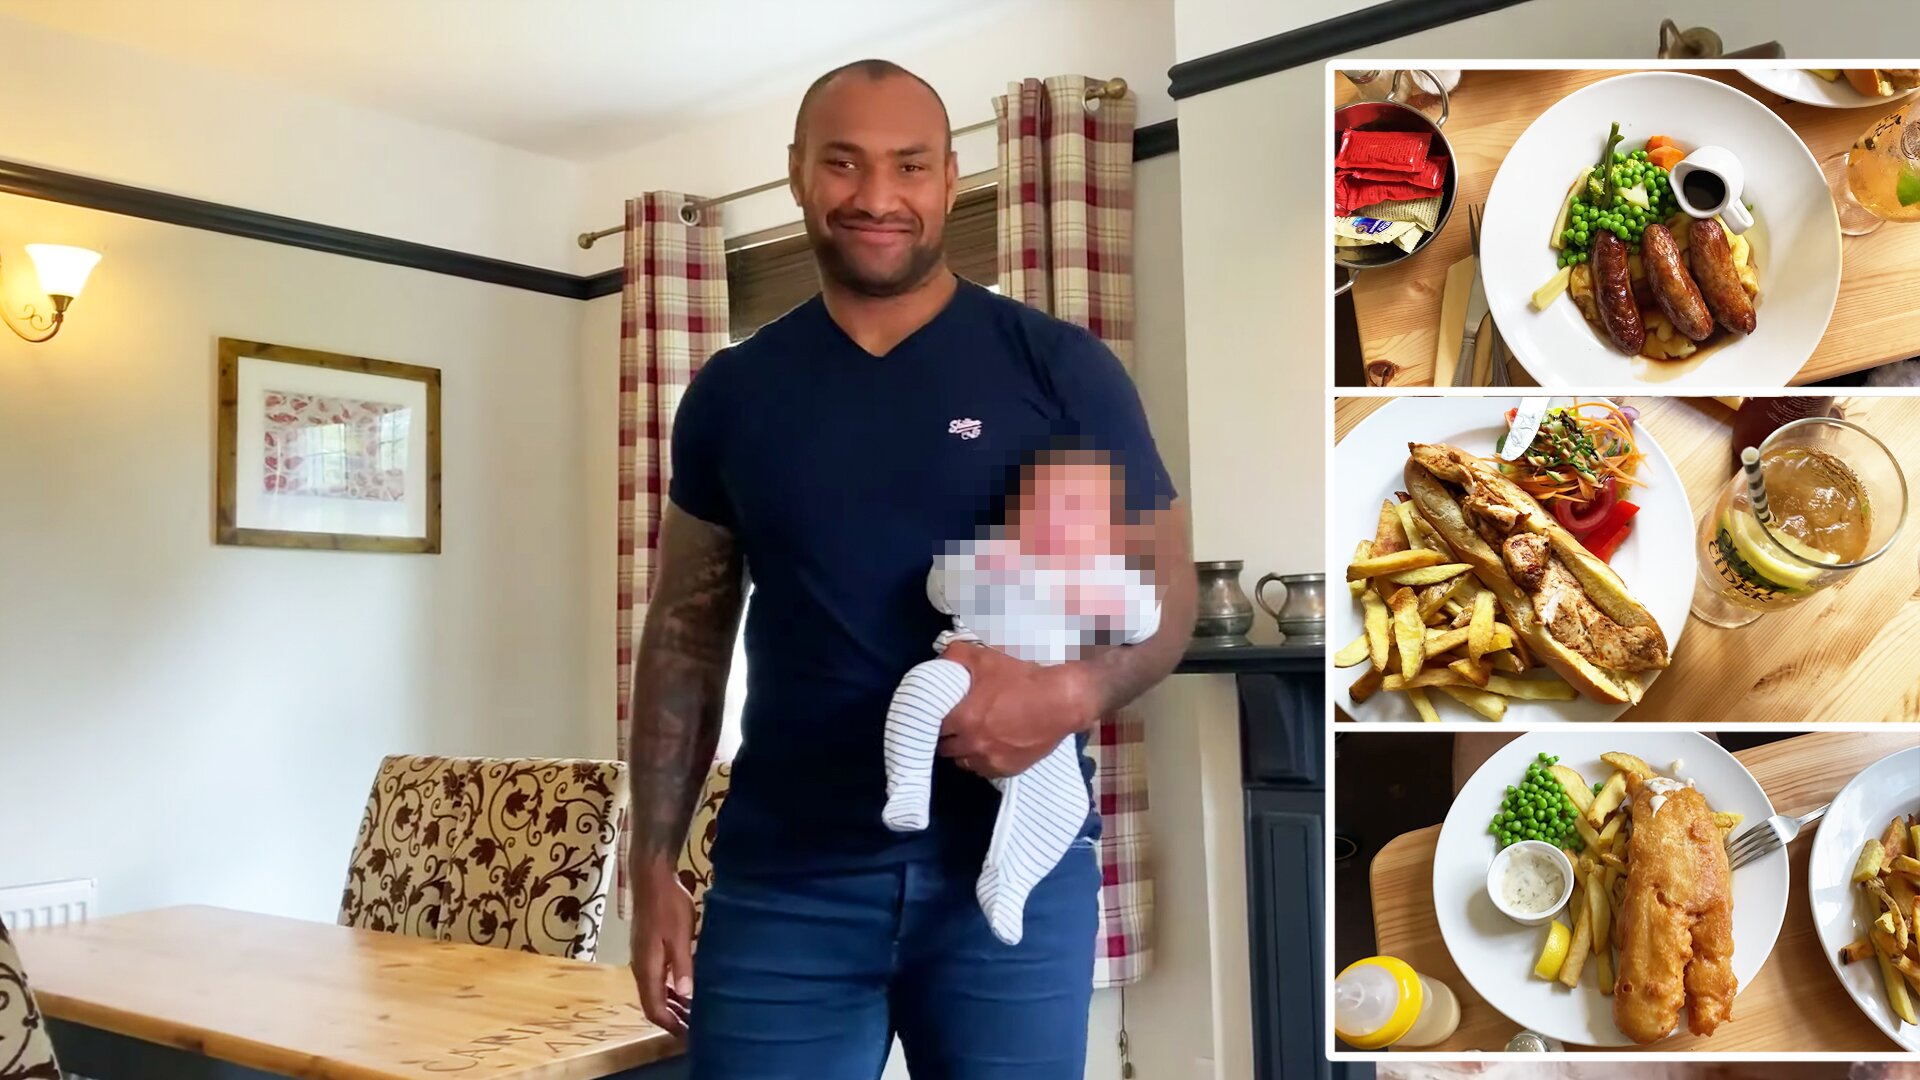 You wouldn't believe how much food a professional rugby player eats in one sitting